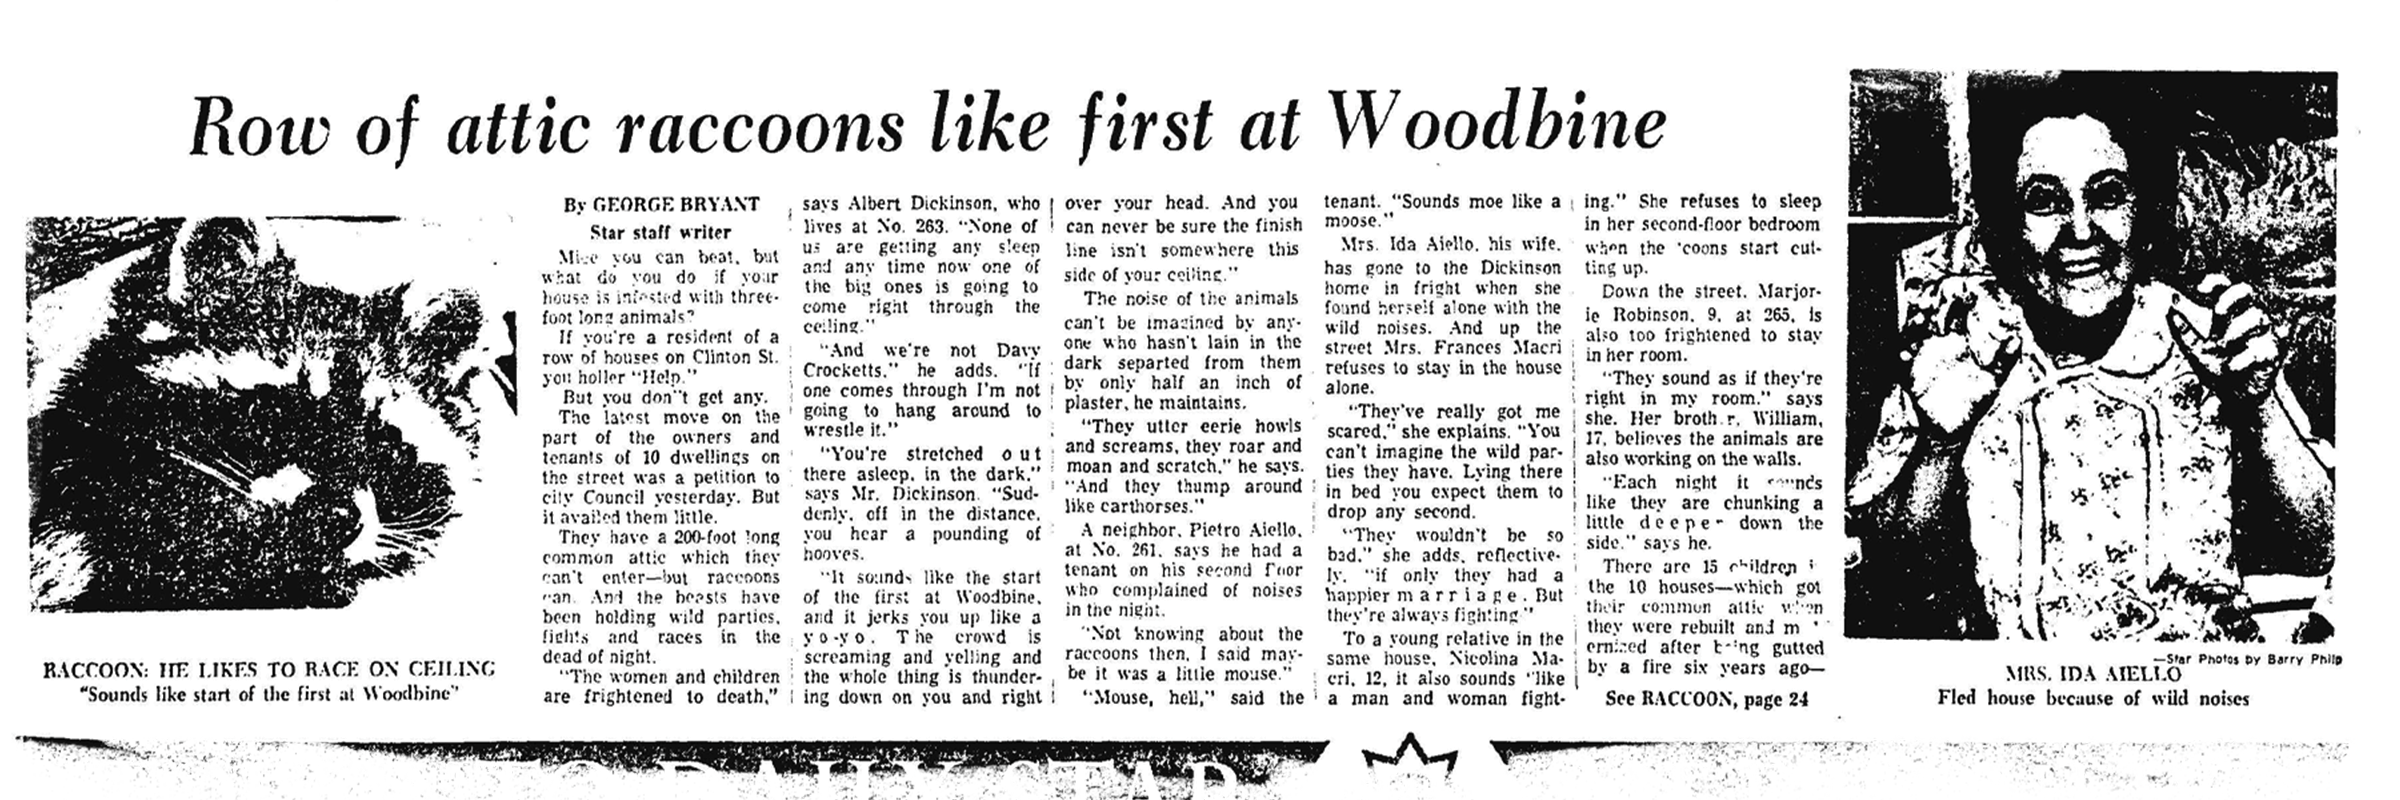 A newspaper clipping from the Daily Star from 1965-02-02. The headline reads 'Row of attic raccoons like first at Woodbine'